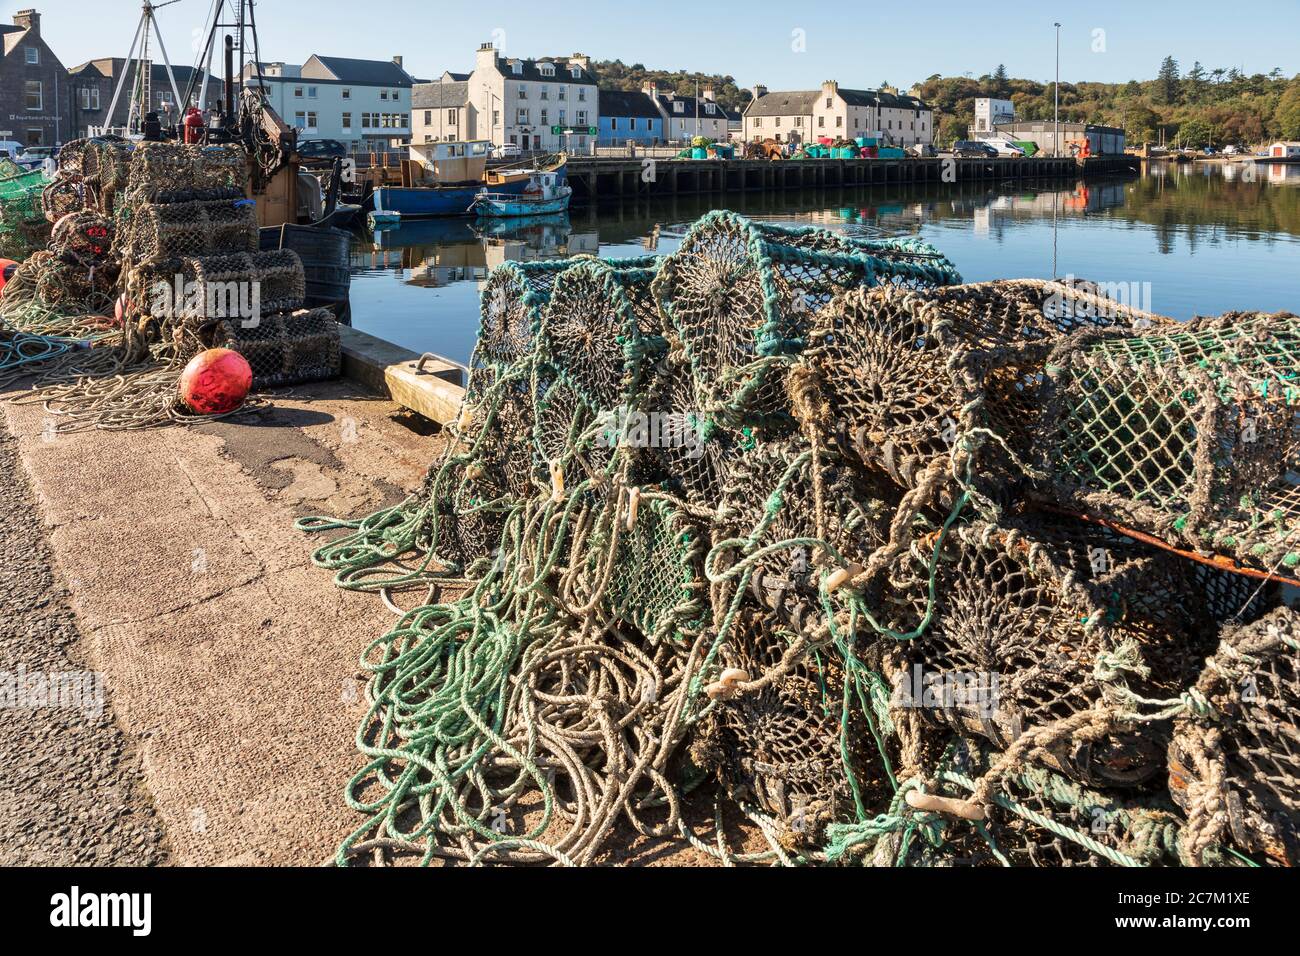 Lobster creels on the harbour at Stornoway, Isle of Lewis, Outer Hebrides, Scotland Stock Photo